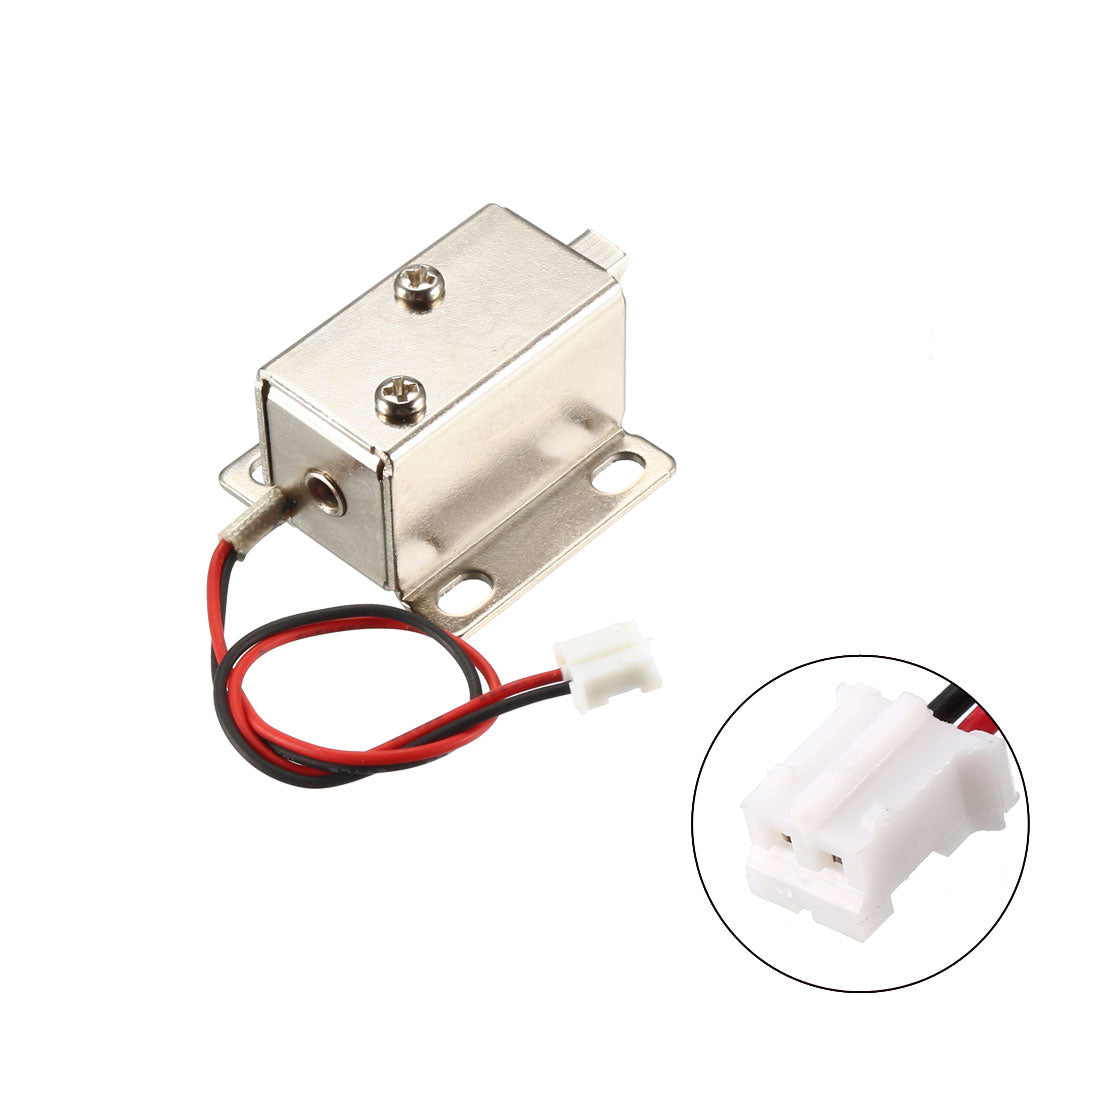 uxcell Uxcell DC 6V 1A 6mm Mini Electromagnetic Solenoid Lock Assembly Tongue Down for Electirc Lock Cabinet Door Lock